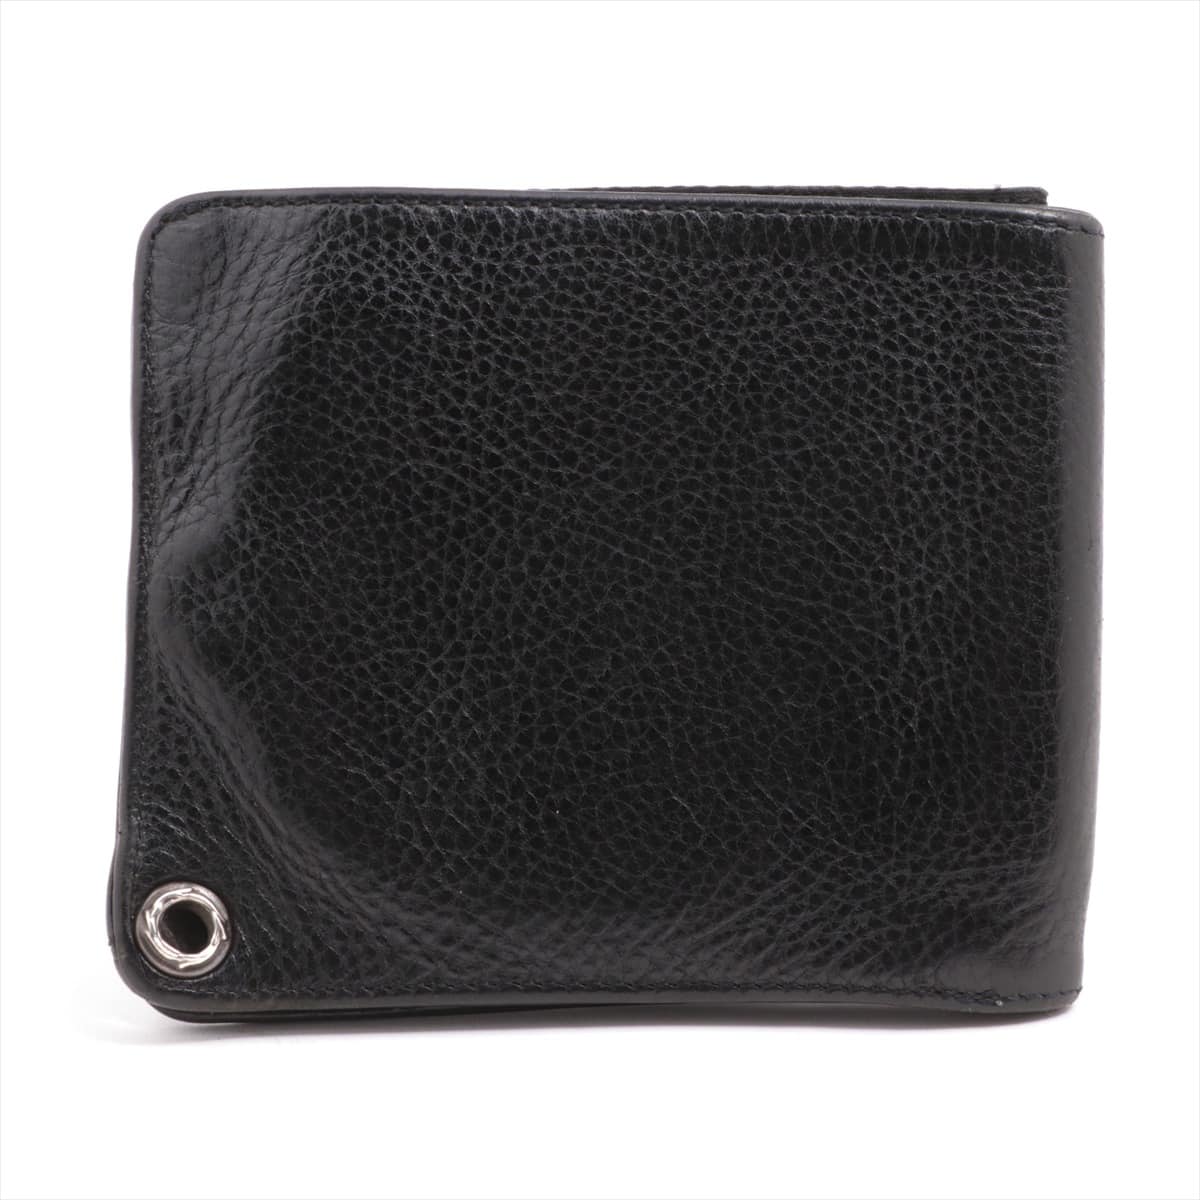 Chrome Hearts 1snap Wallet Leather With invoice